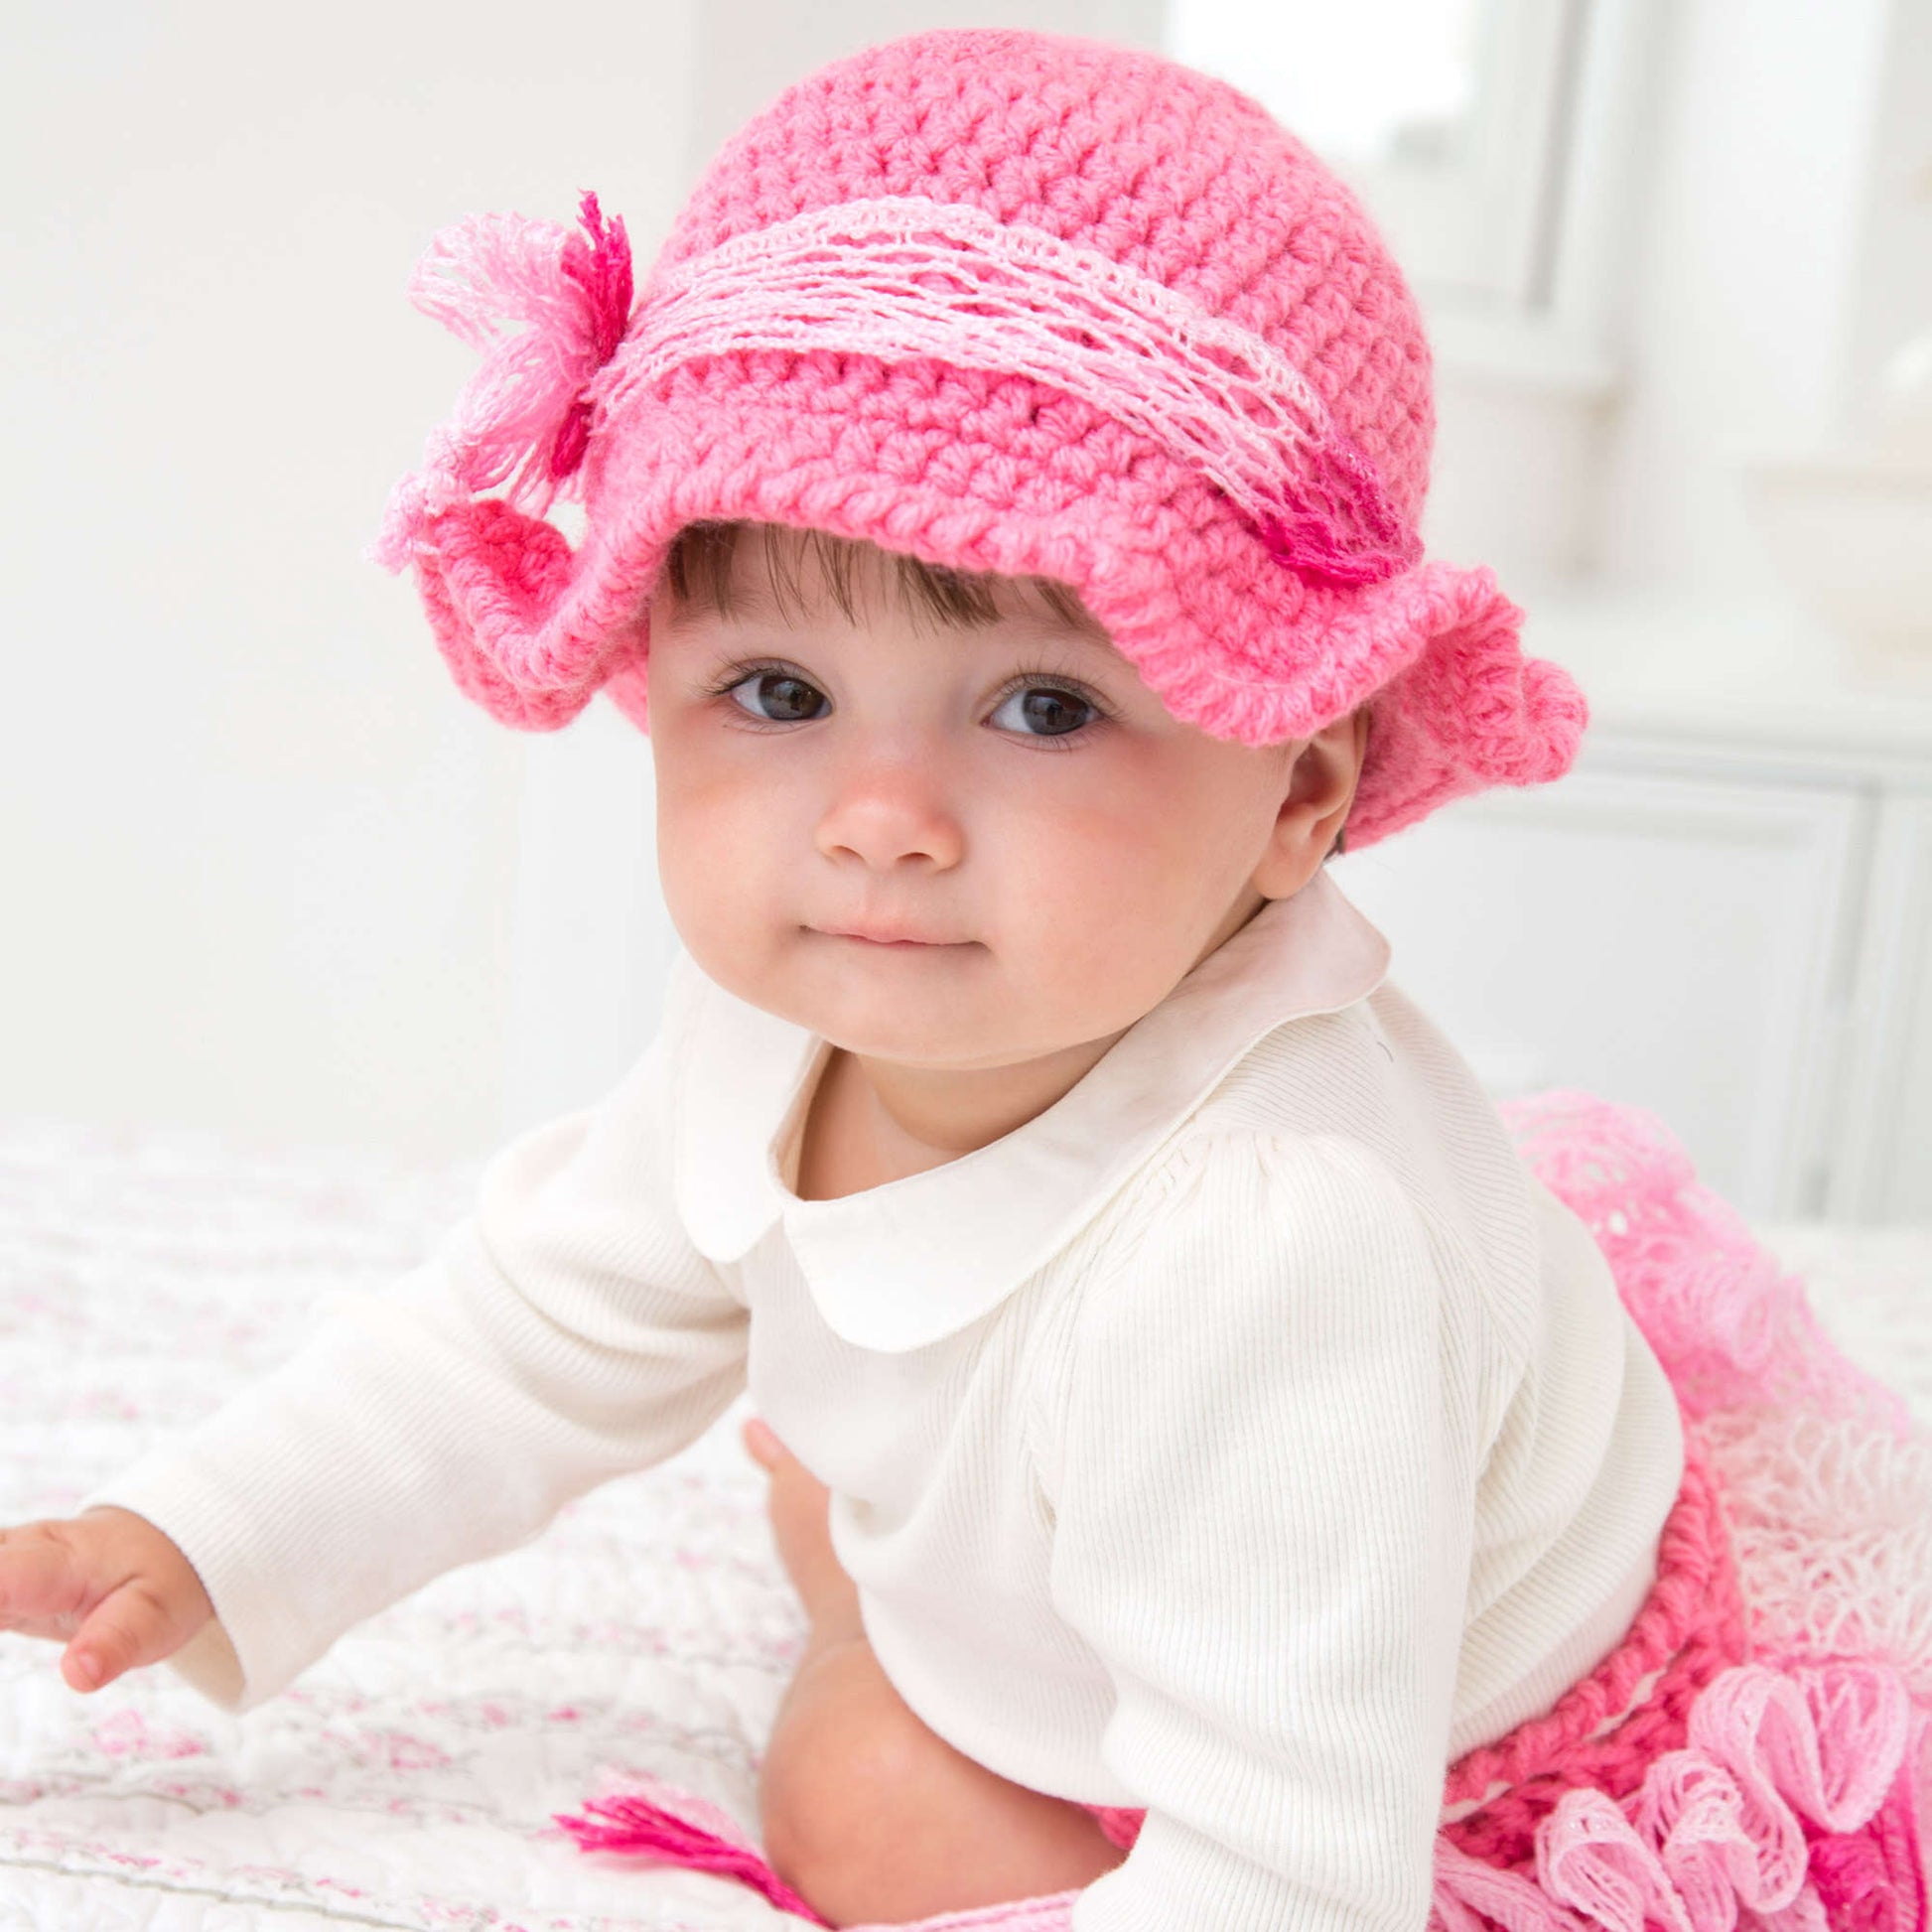 Free Red Heart Crochet Country Baby Diaper Cover & Hat Pattern